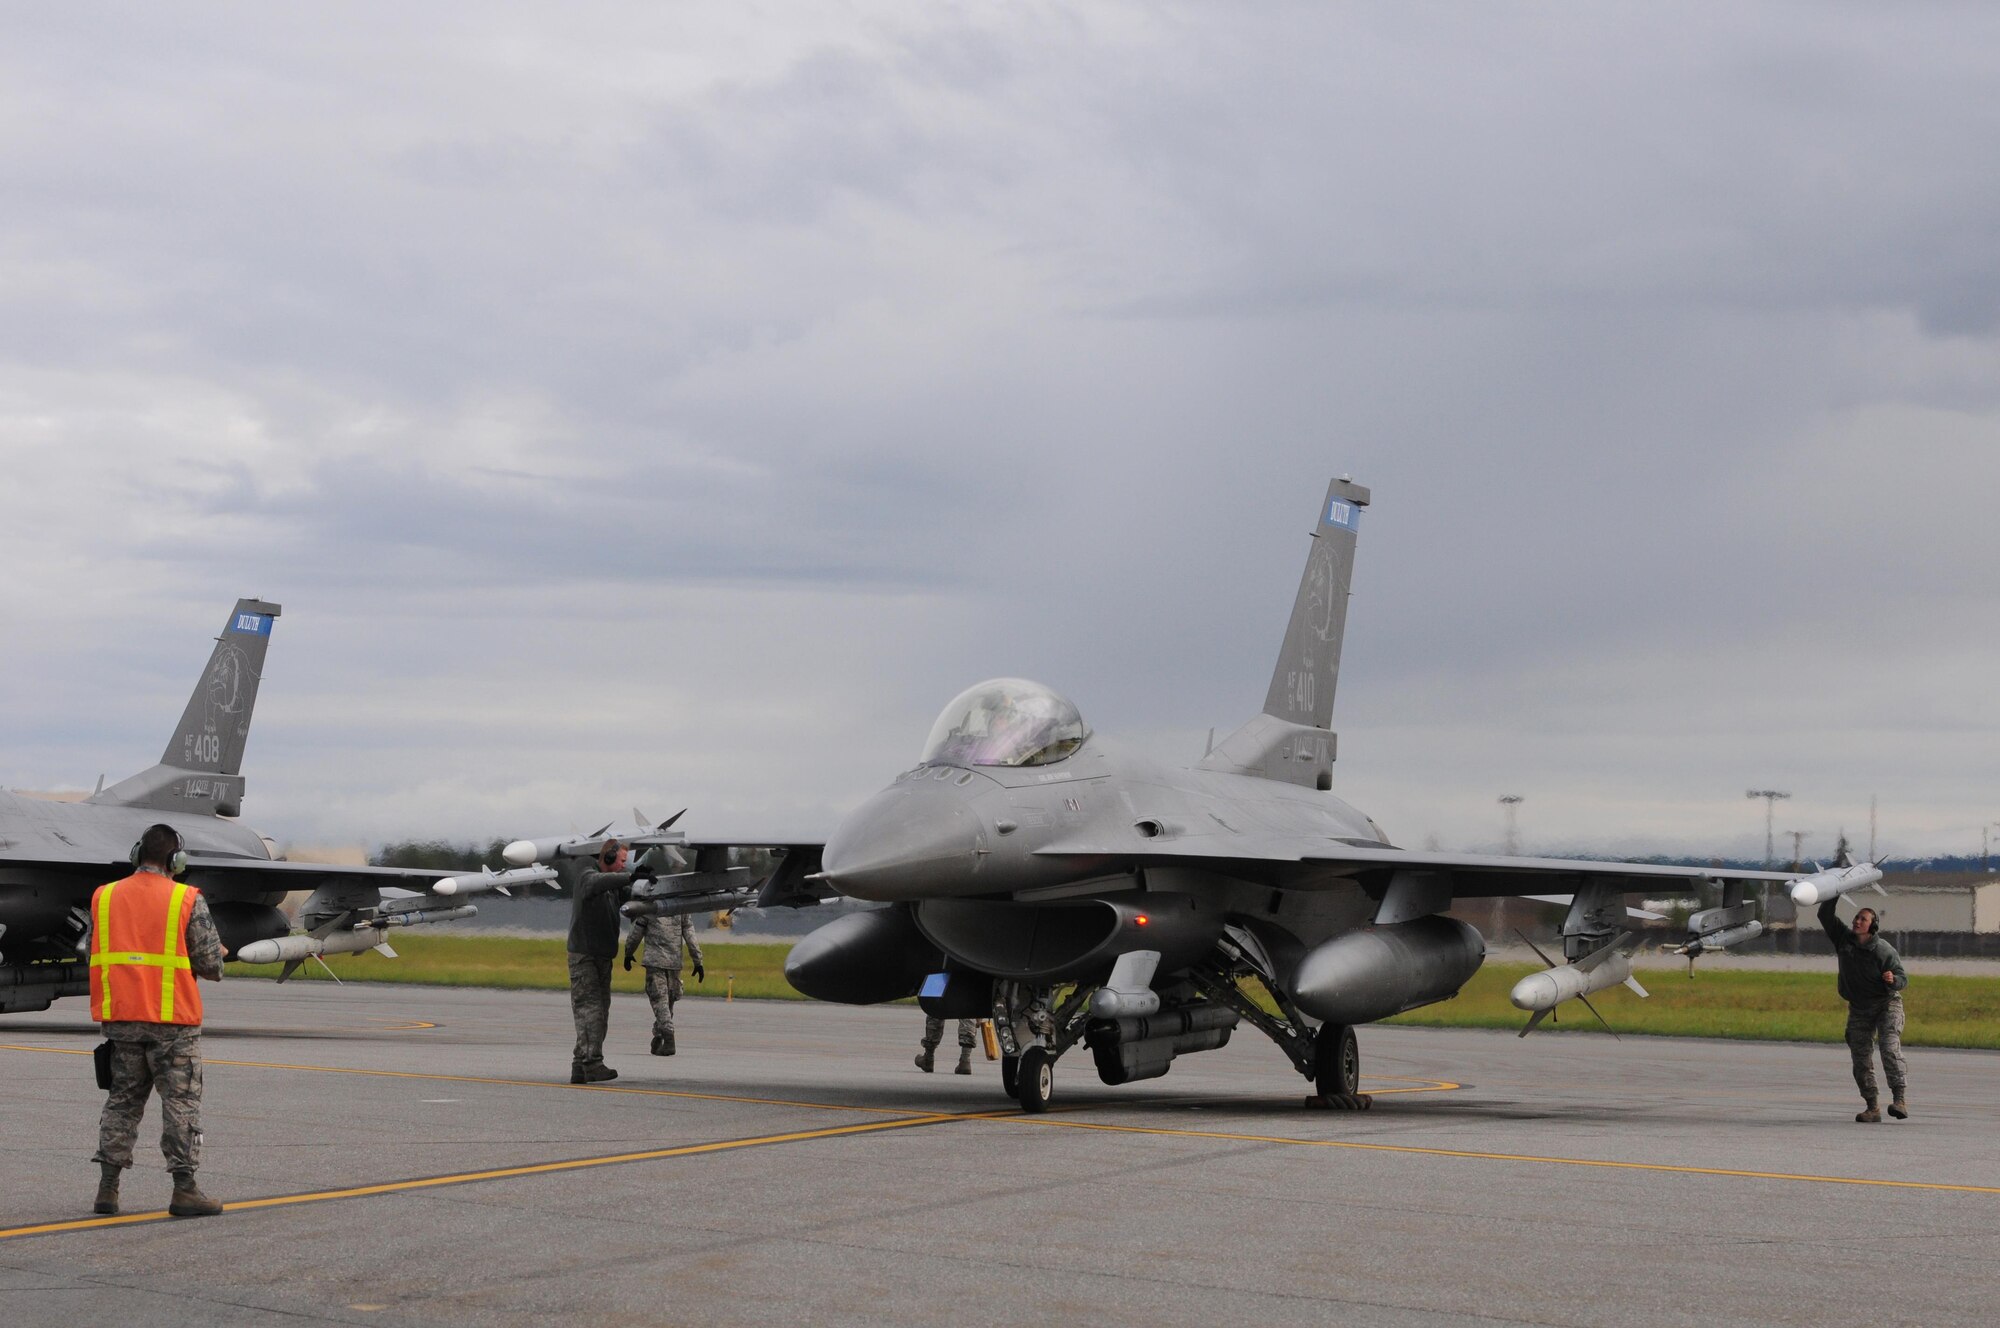 U.S. Air Force weapons load Airmen from the 148th Fighter Wing, Duluth, Minn., perform final inspections before take-off on a F-16 Fighting Falcon at Eielson Air Force Base, Alaska, Aug. 11, 2015, during RED FLAG-Alaska 15-3.  RF-A is a Pacific Air Forces commander-directed field training exercise for U.S. and partner nation forces, providing combined offensive counter-air, interdiction, close air support and large force employment training in a simulated combat environment.  (U.S. Air Force photo by Master Sgt. Ralph Kapustka/Released)